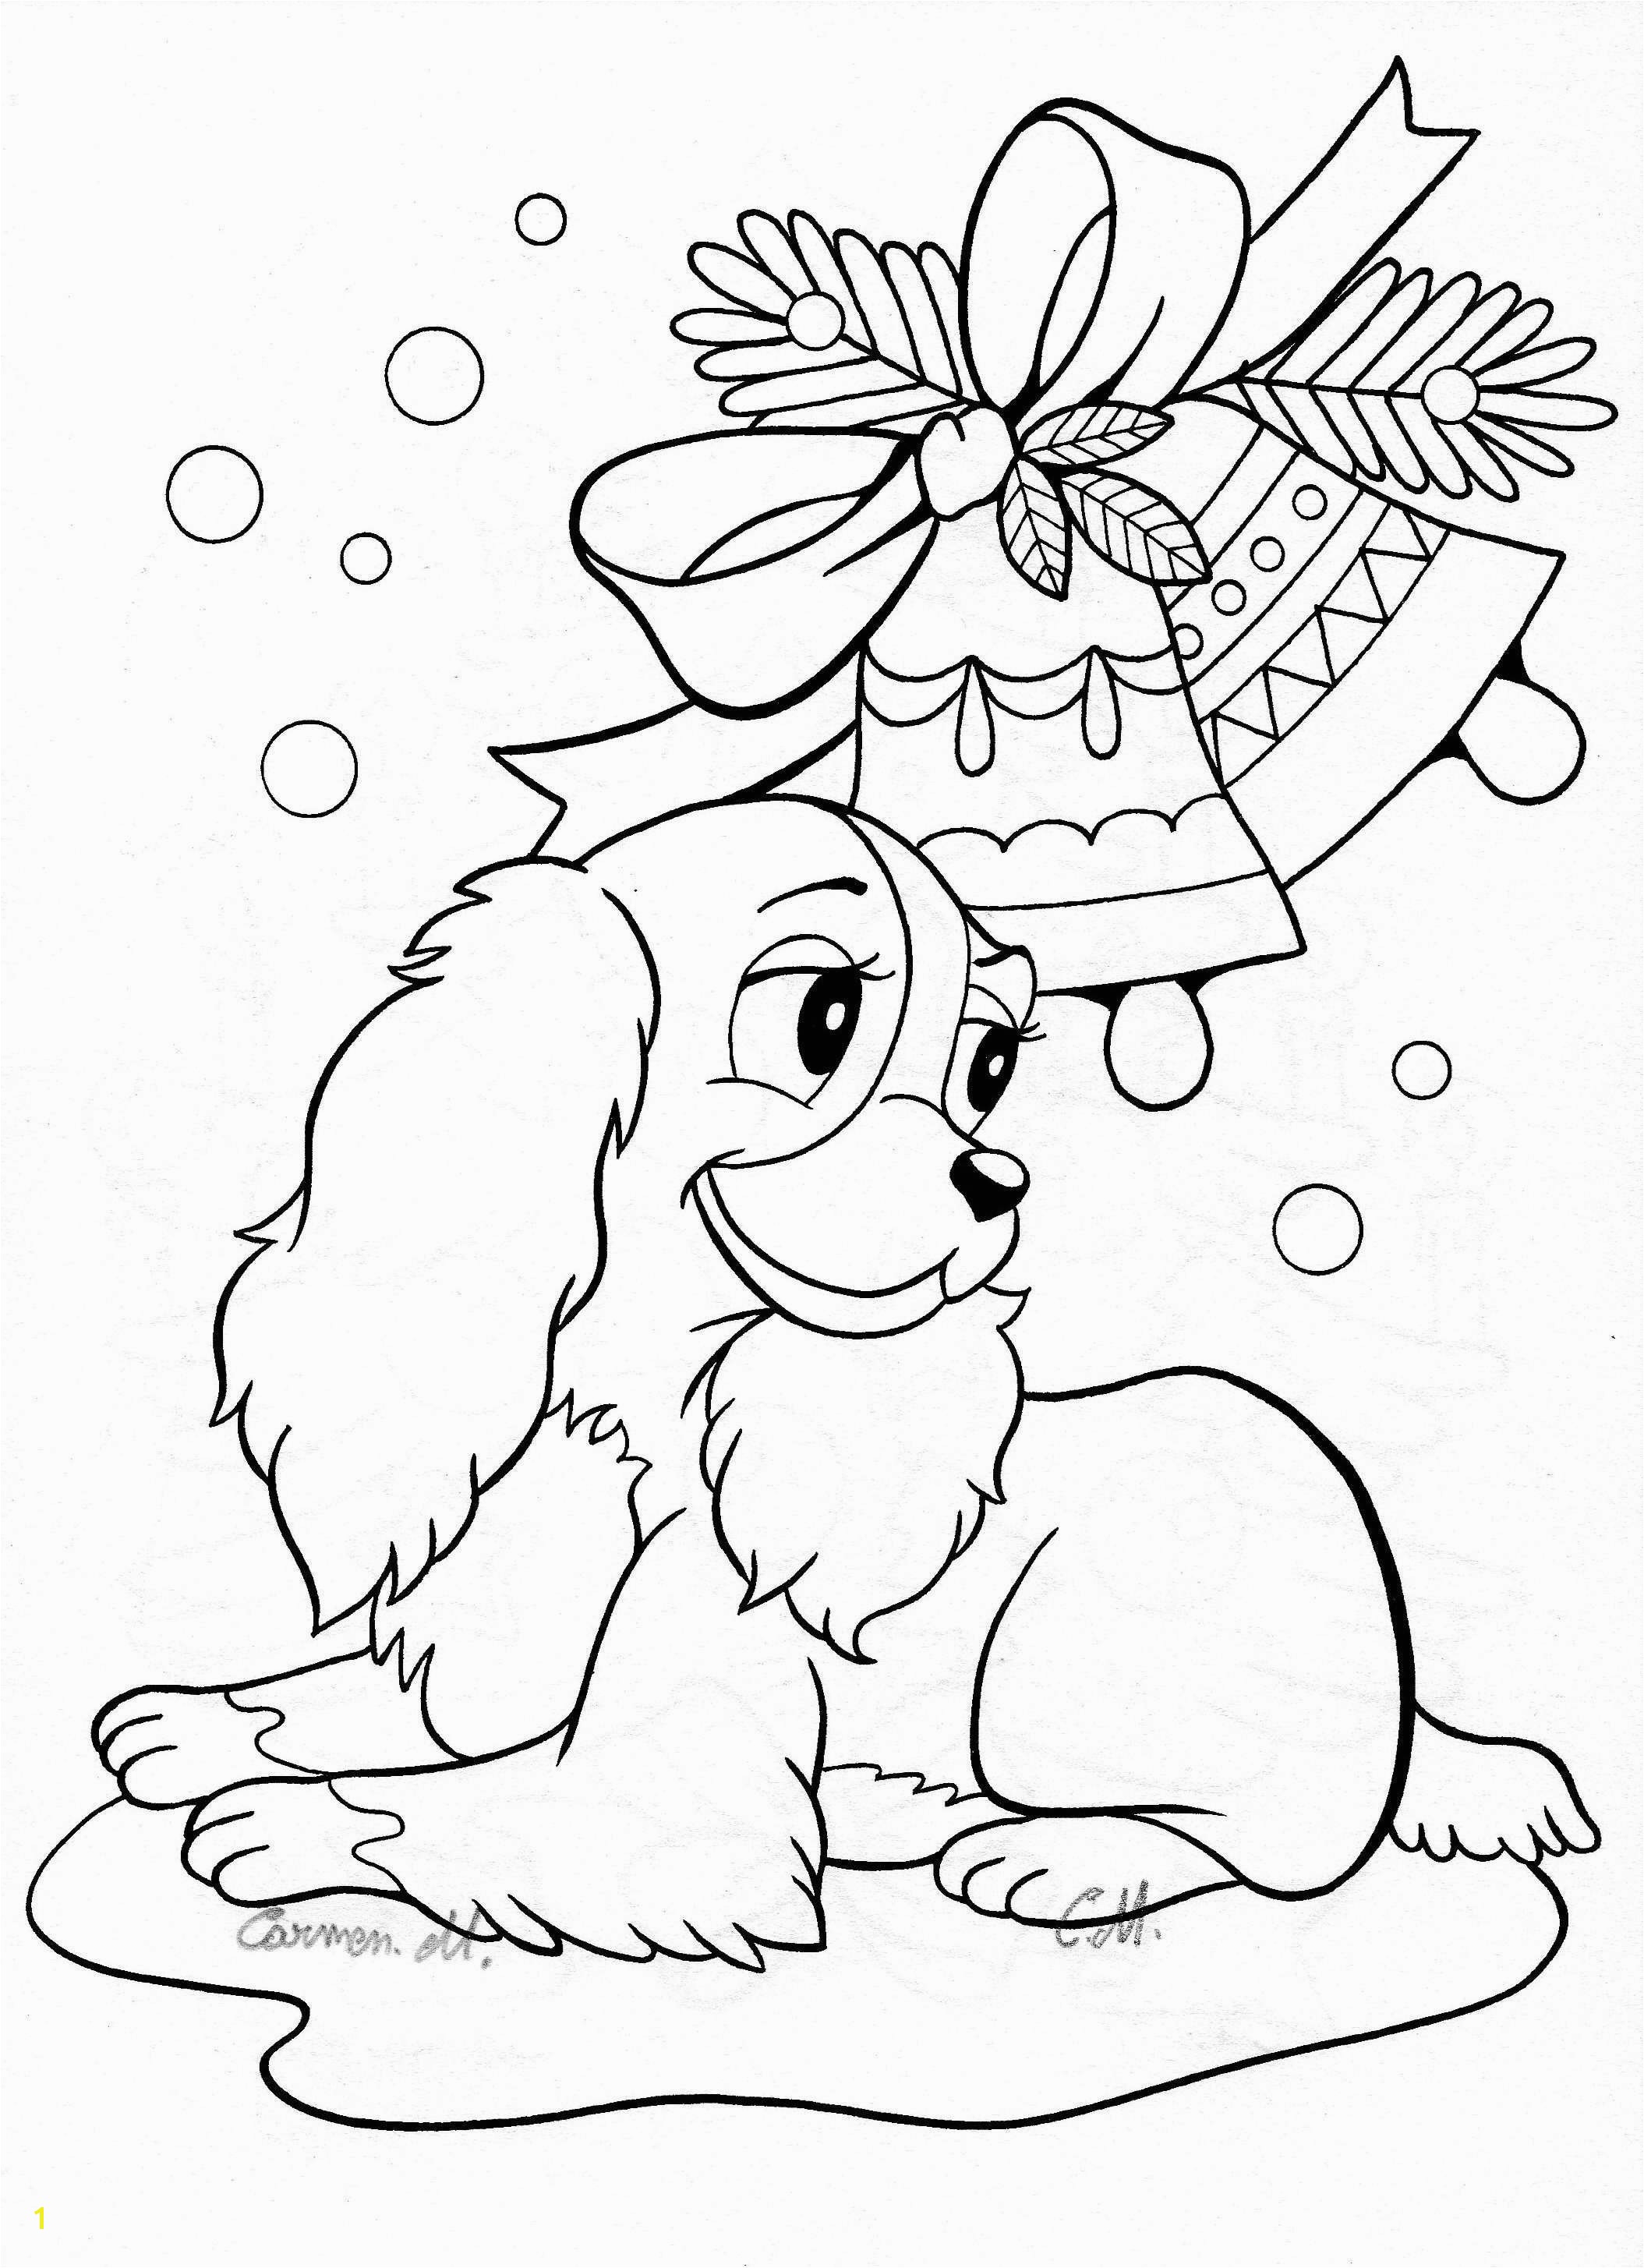 Coloring Pages for 10 Year Old Girls 21 Free Girl Coloring Pages to Print Free